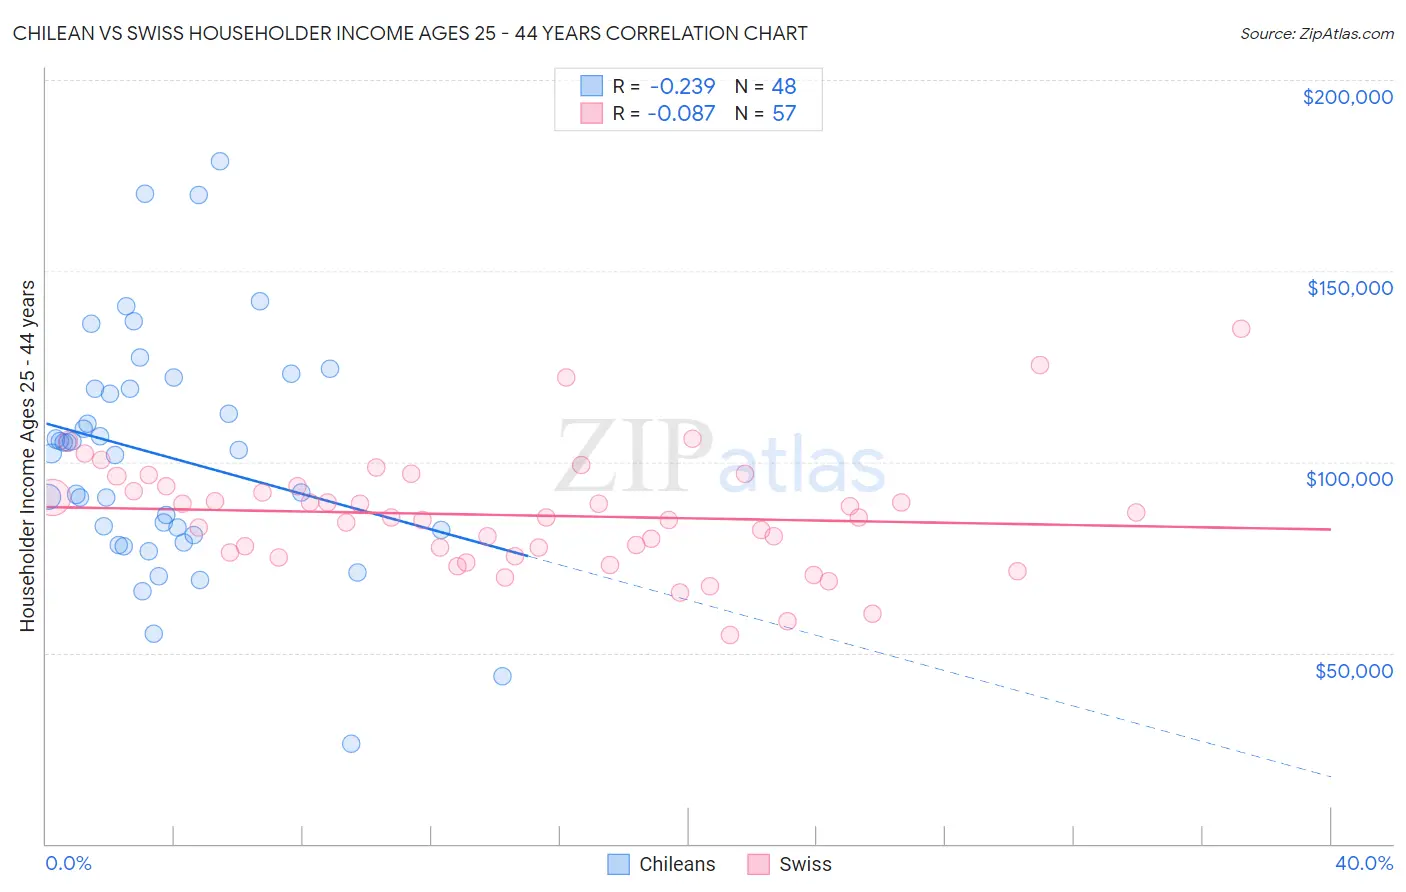 Chilean vs Swiss Householder Income Ages 25 - 44 years